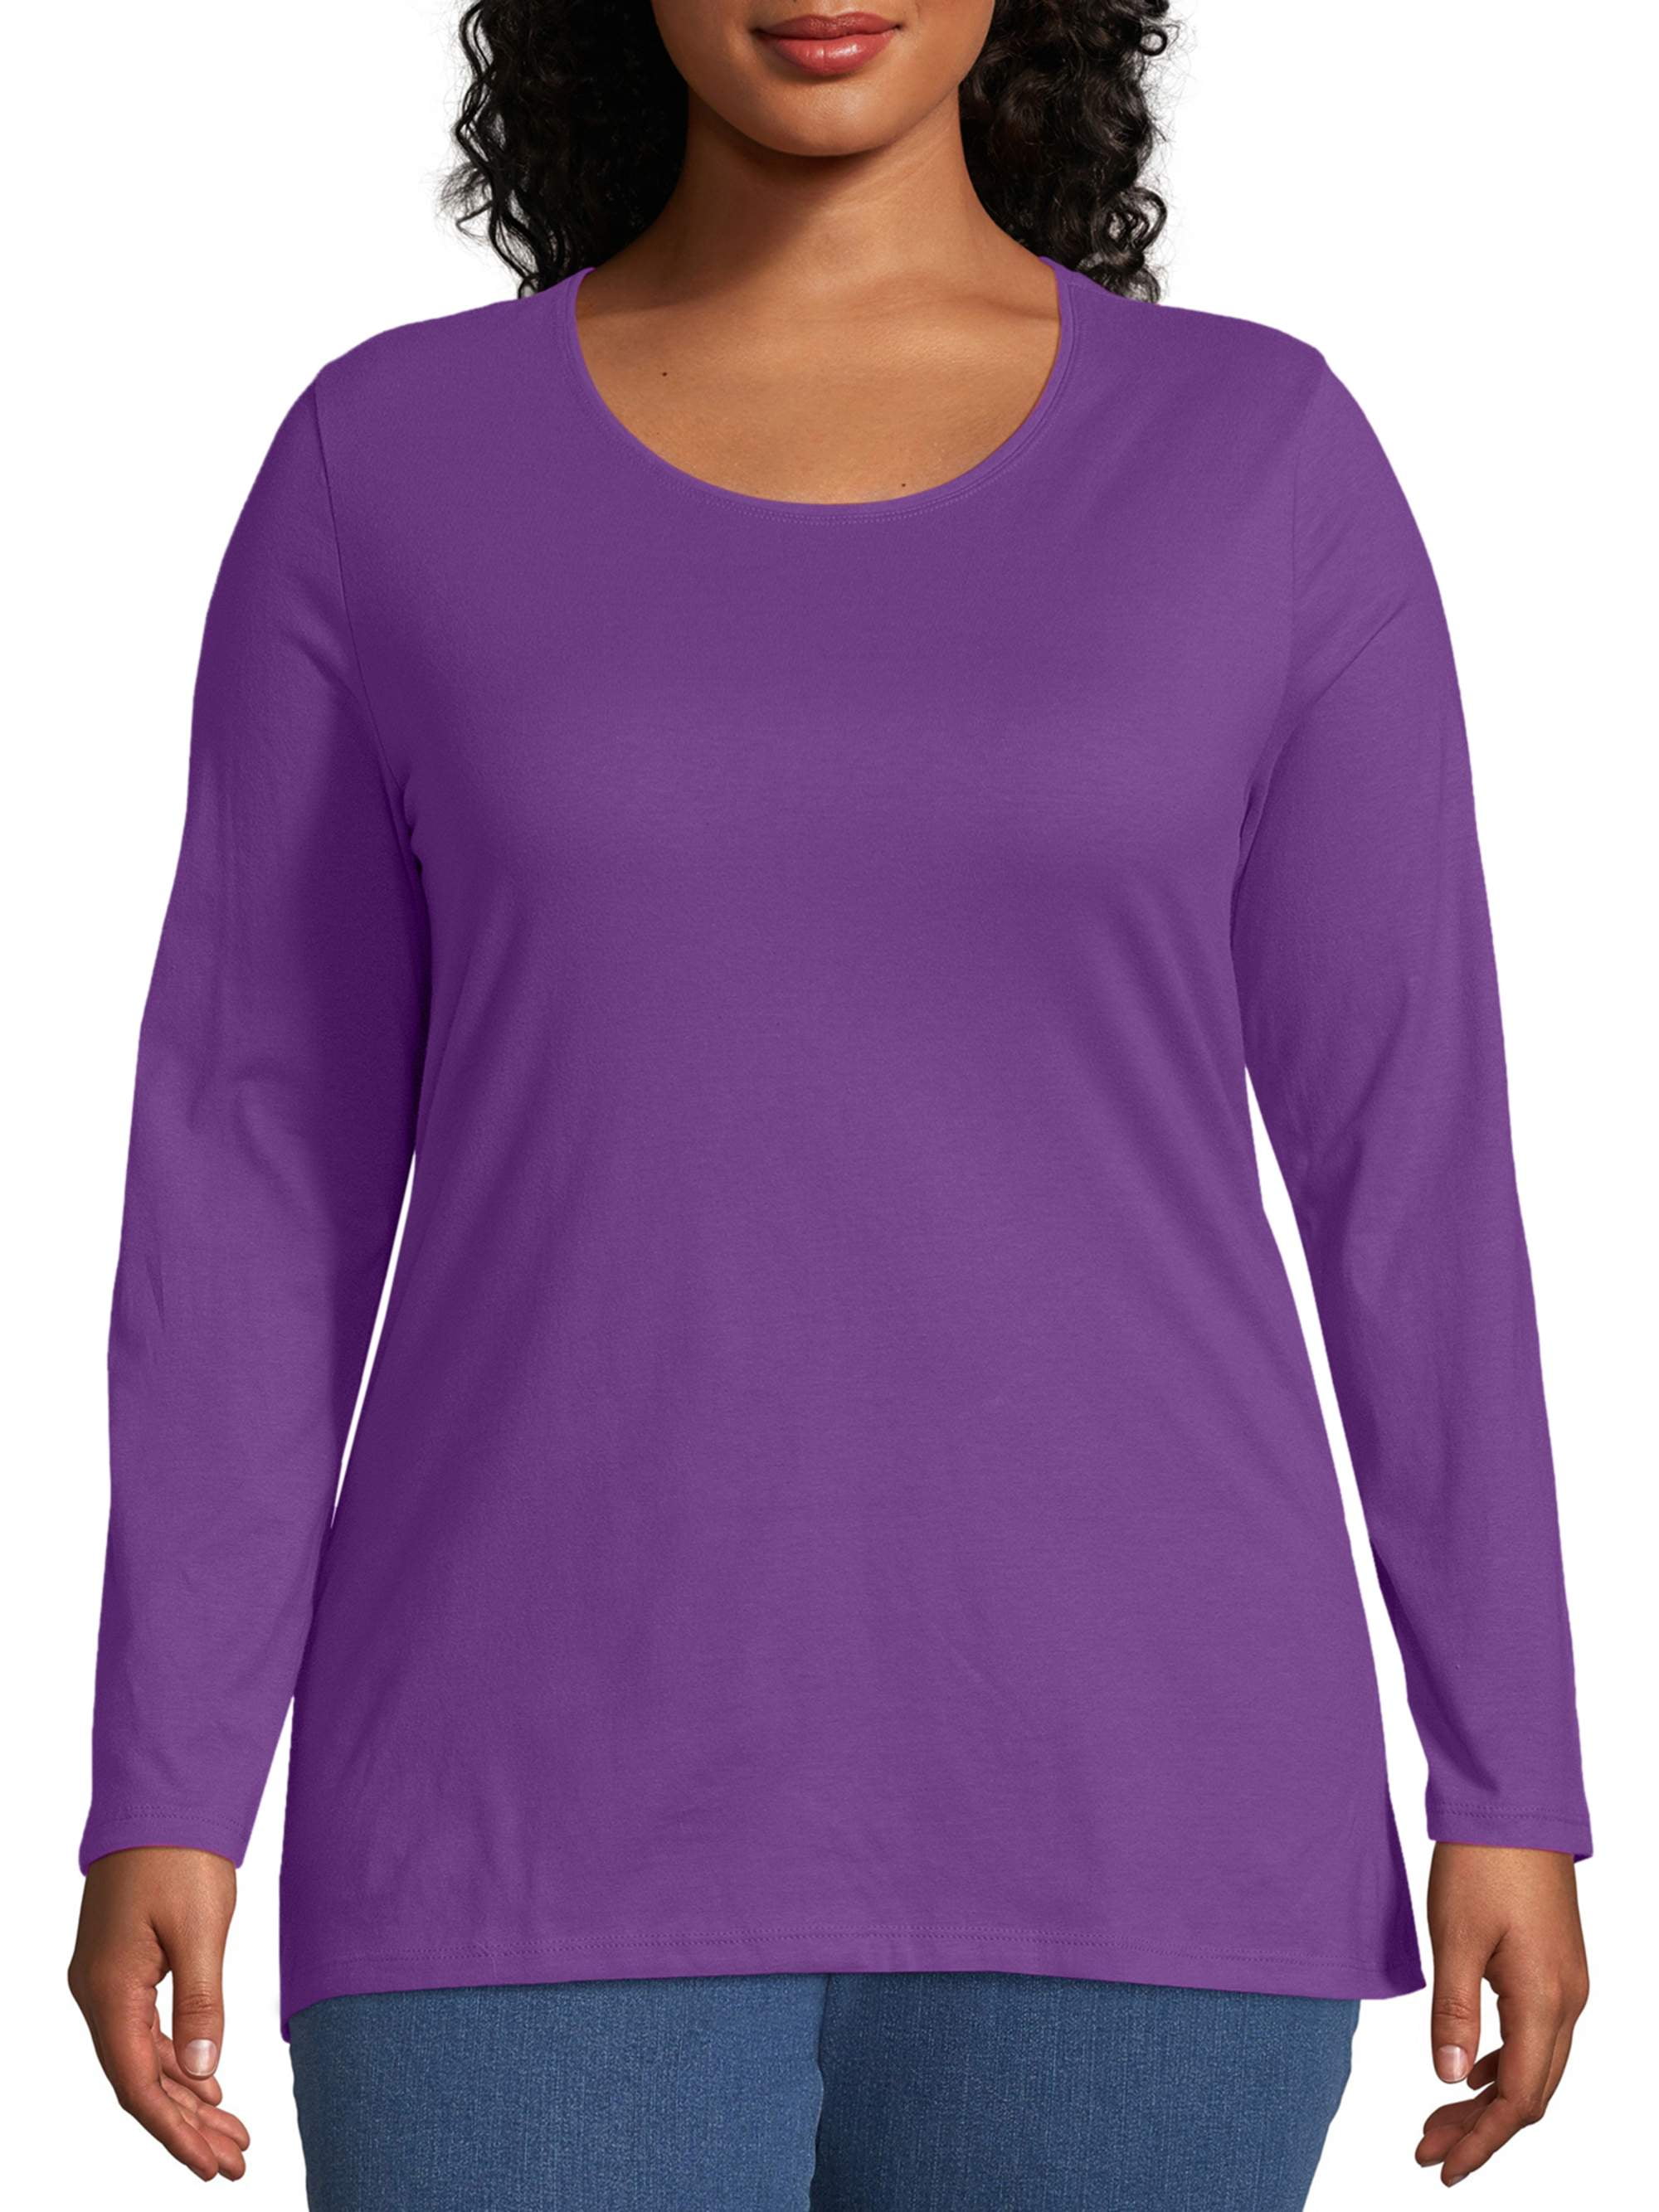 JUST MY SIZE Women's Plus Size Long Sleeve Tee 